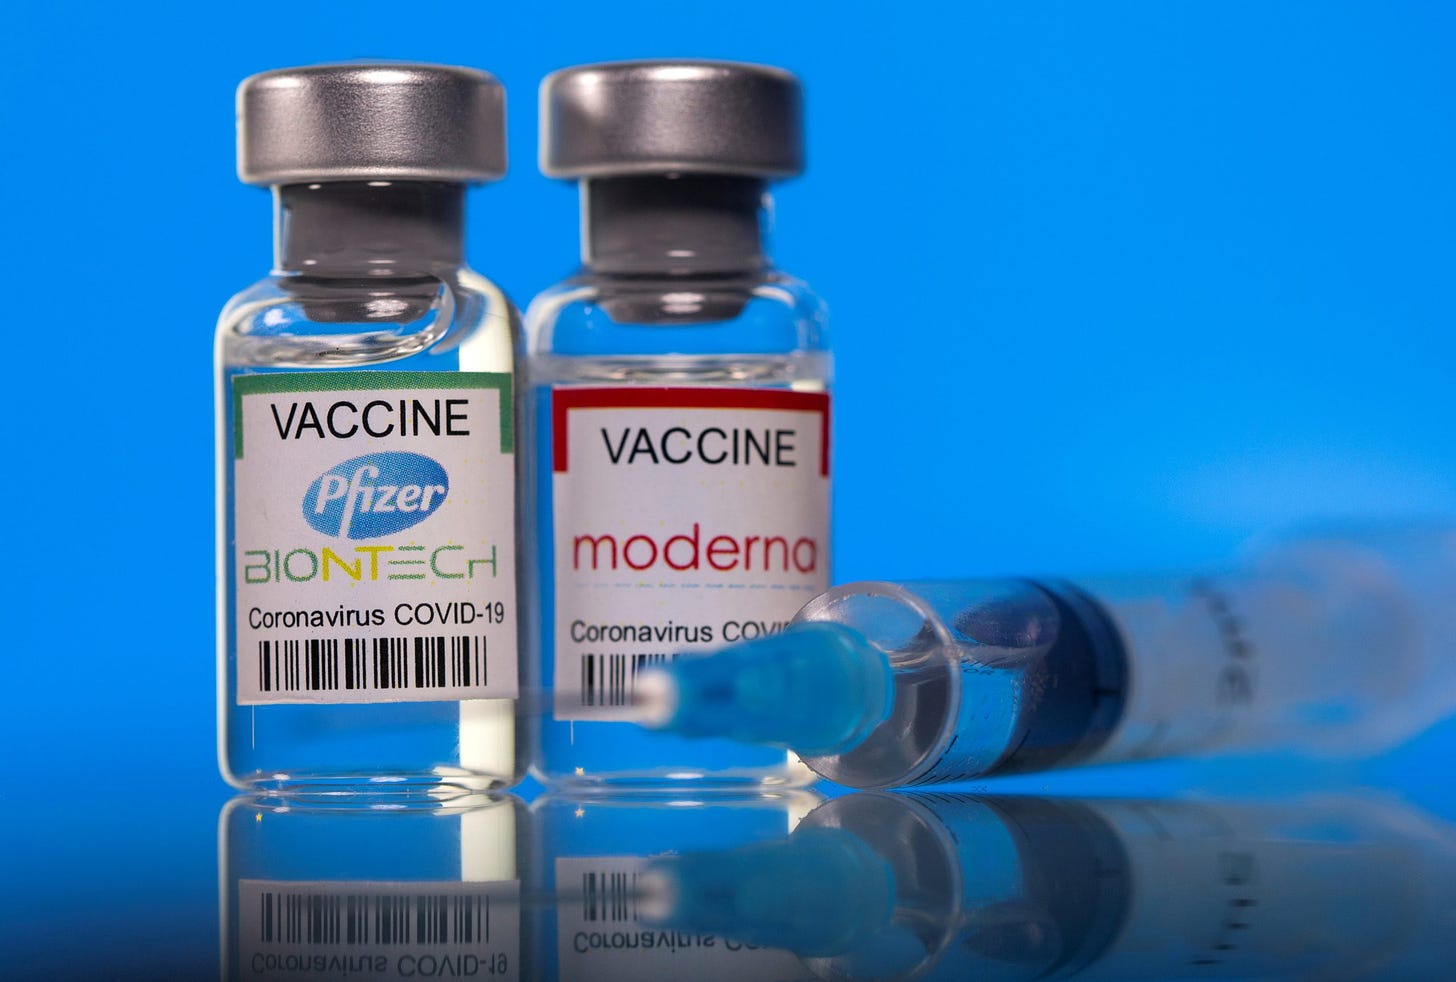 U.S. Medicines Regulator to Add Warning to Pfizer and Moderna Vaccines Over Link to Heart Inflammation